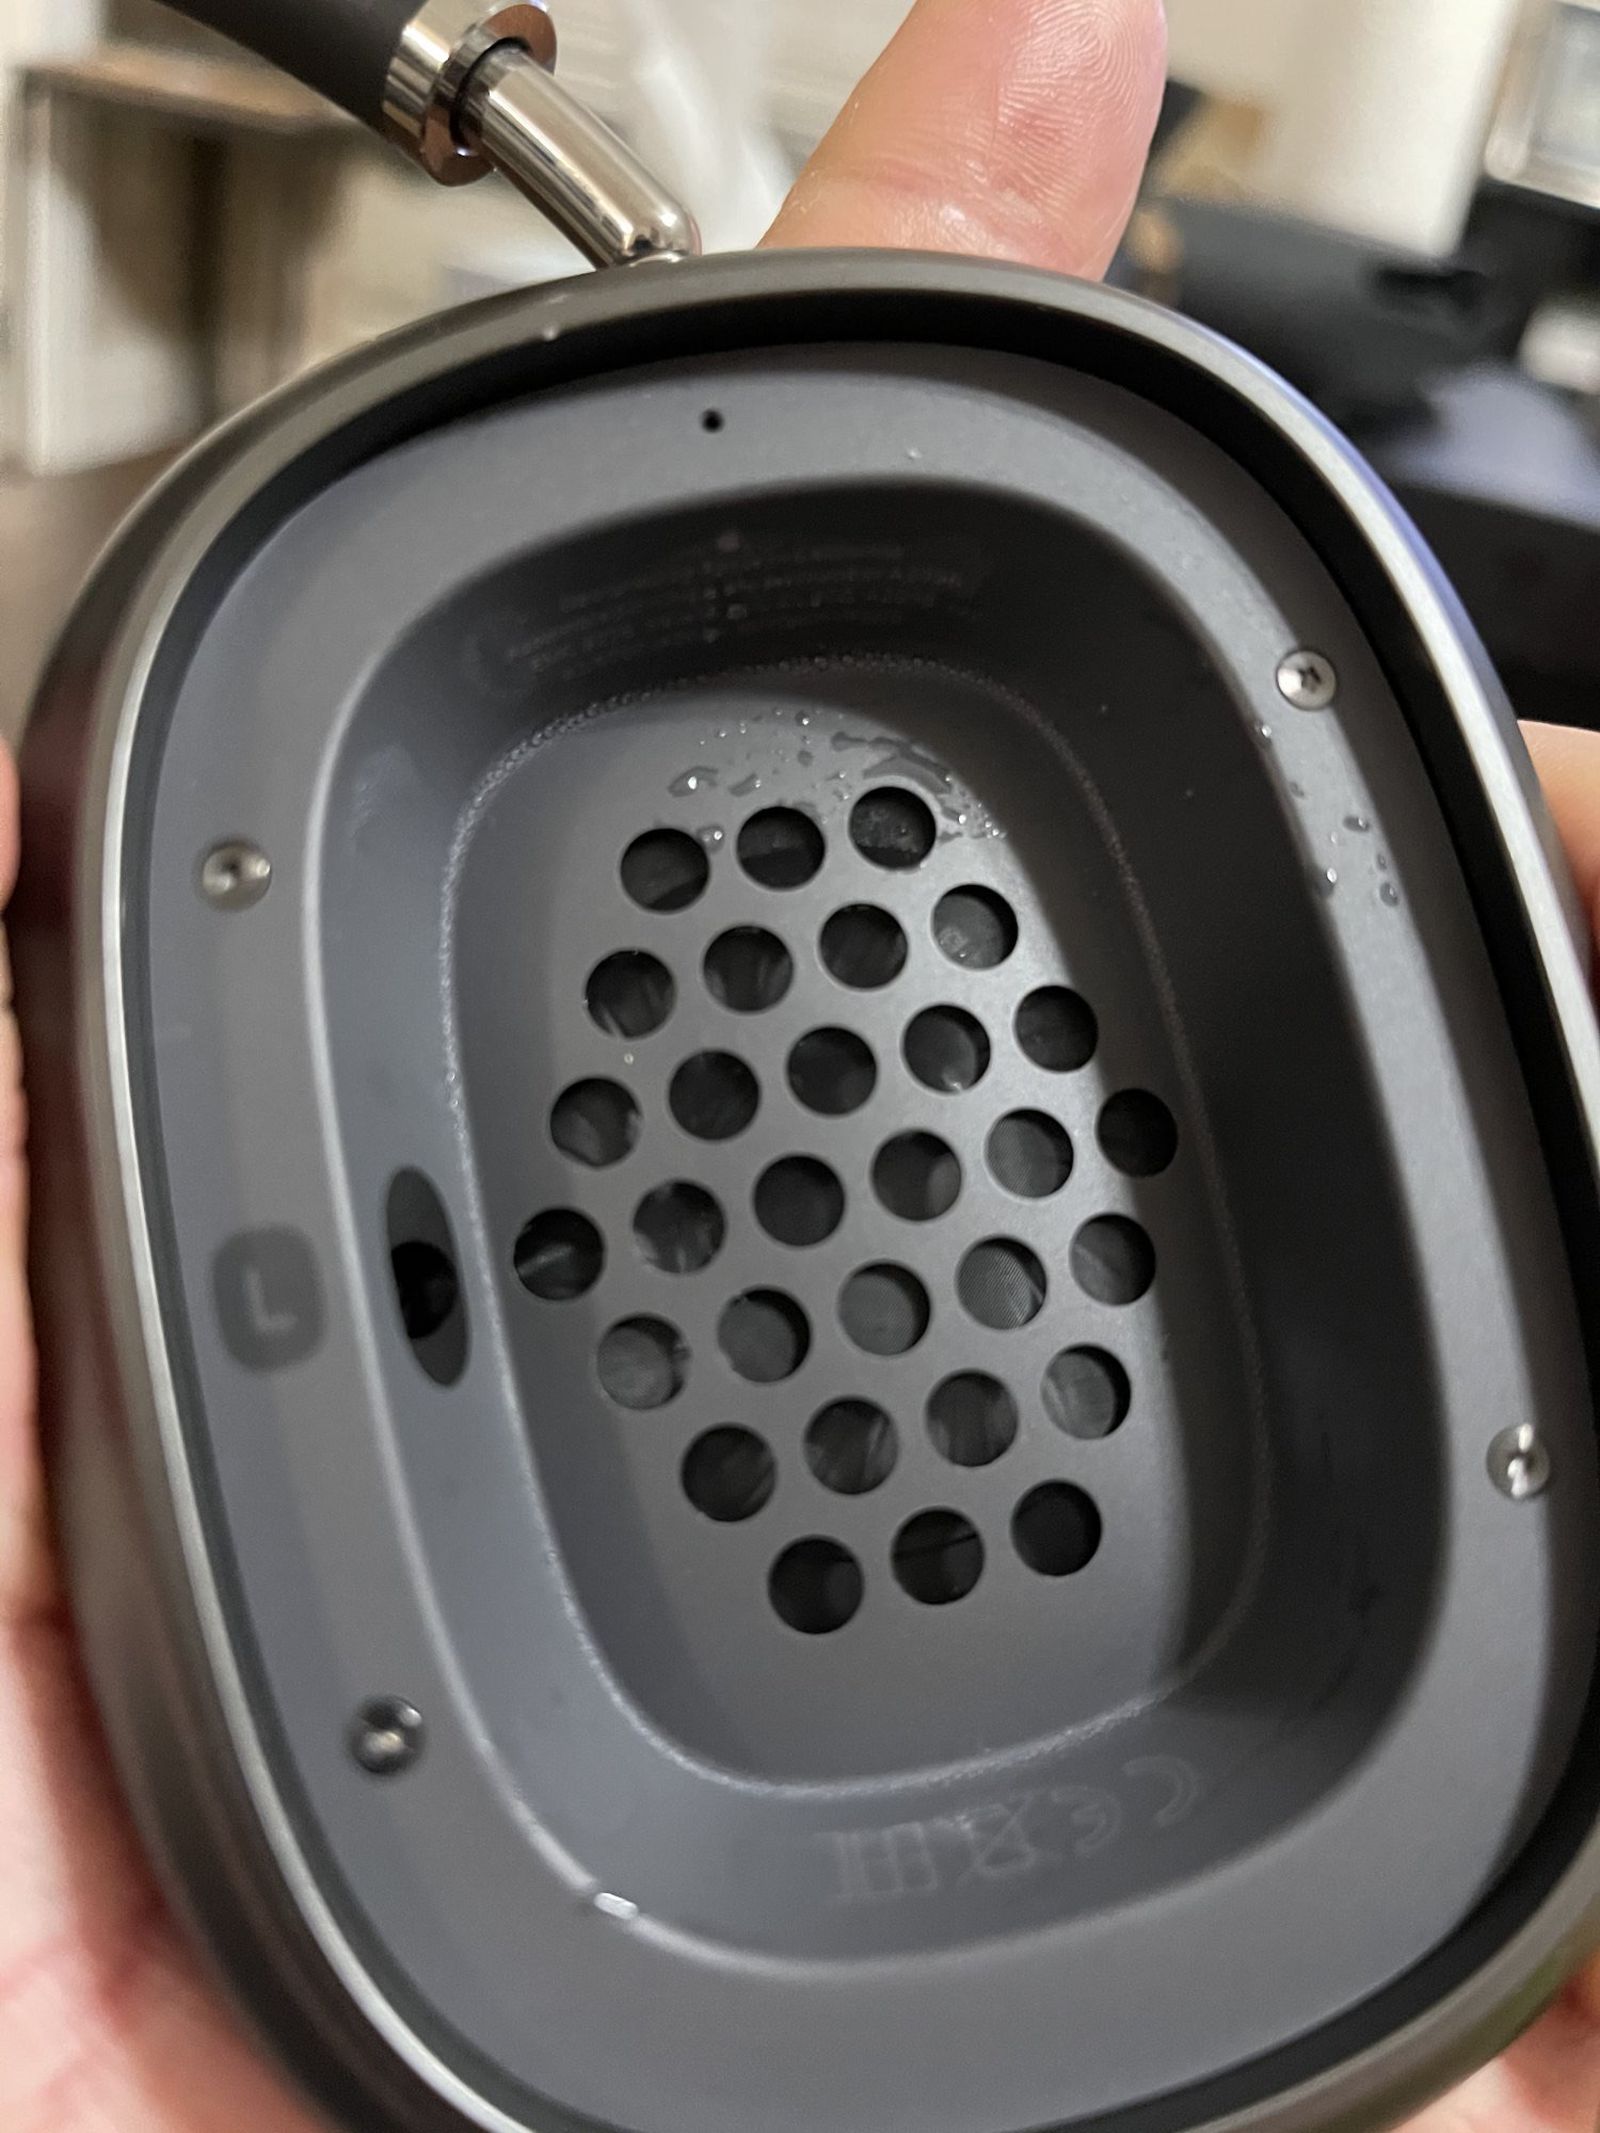 Some AirPods Max owners complain about condensation in ear cups